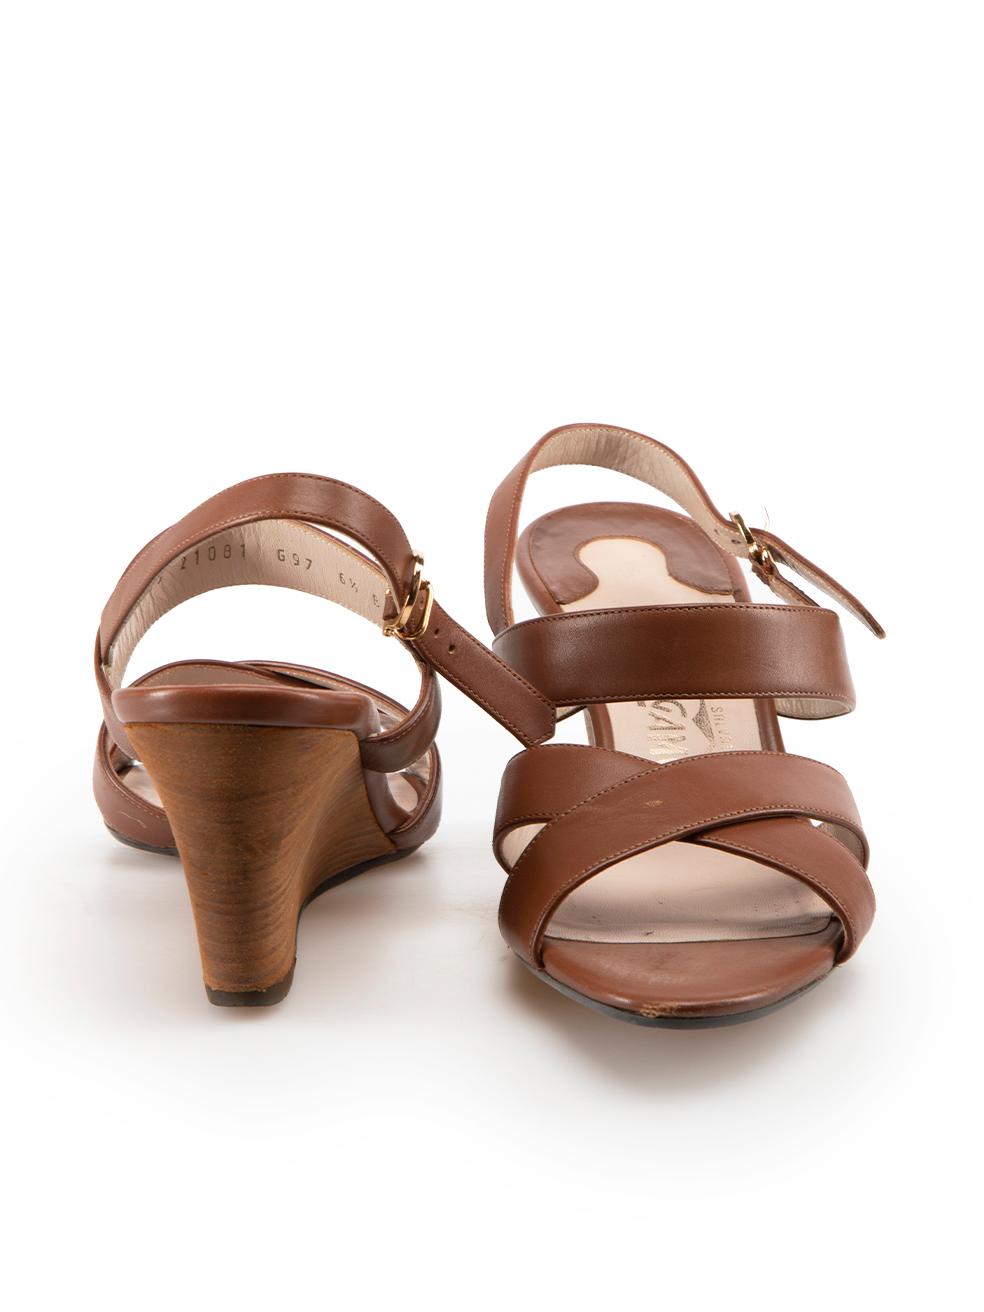 Salvatore Ferragamo Brown Leather Wedge Sandals Size US 6.5 In Excellent Condition For Sale In London, GB